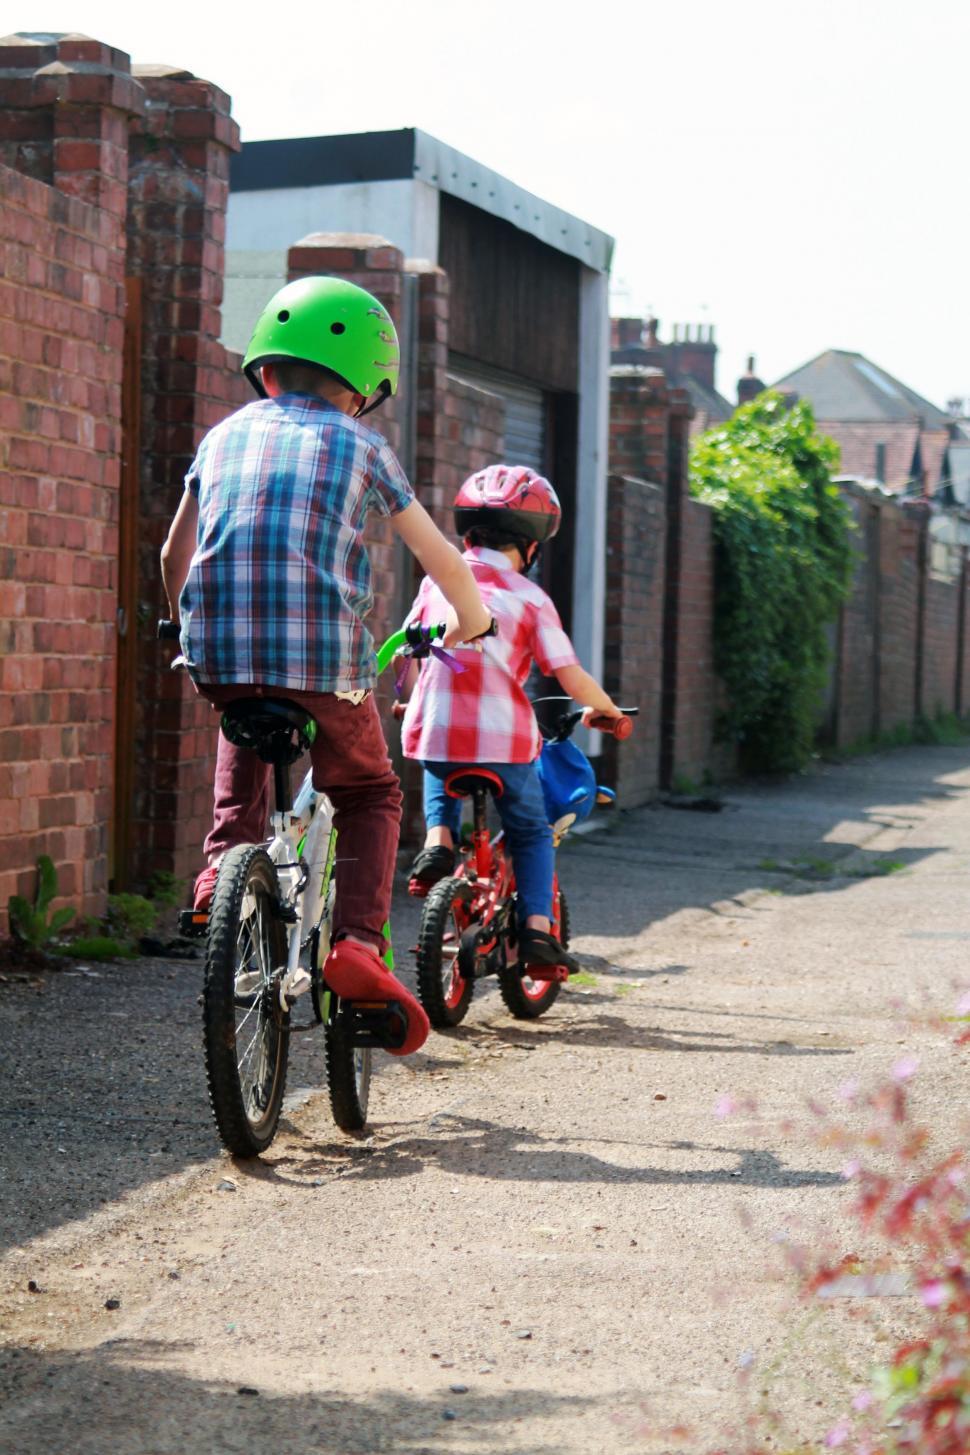 Free Image of Two Children Riding on Bicycles 